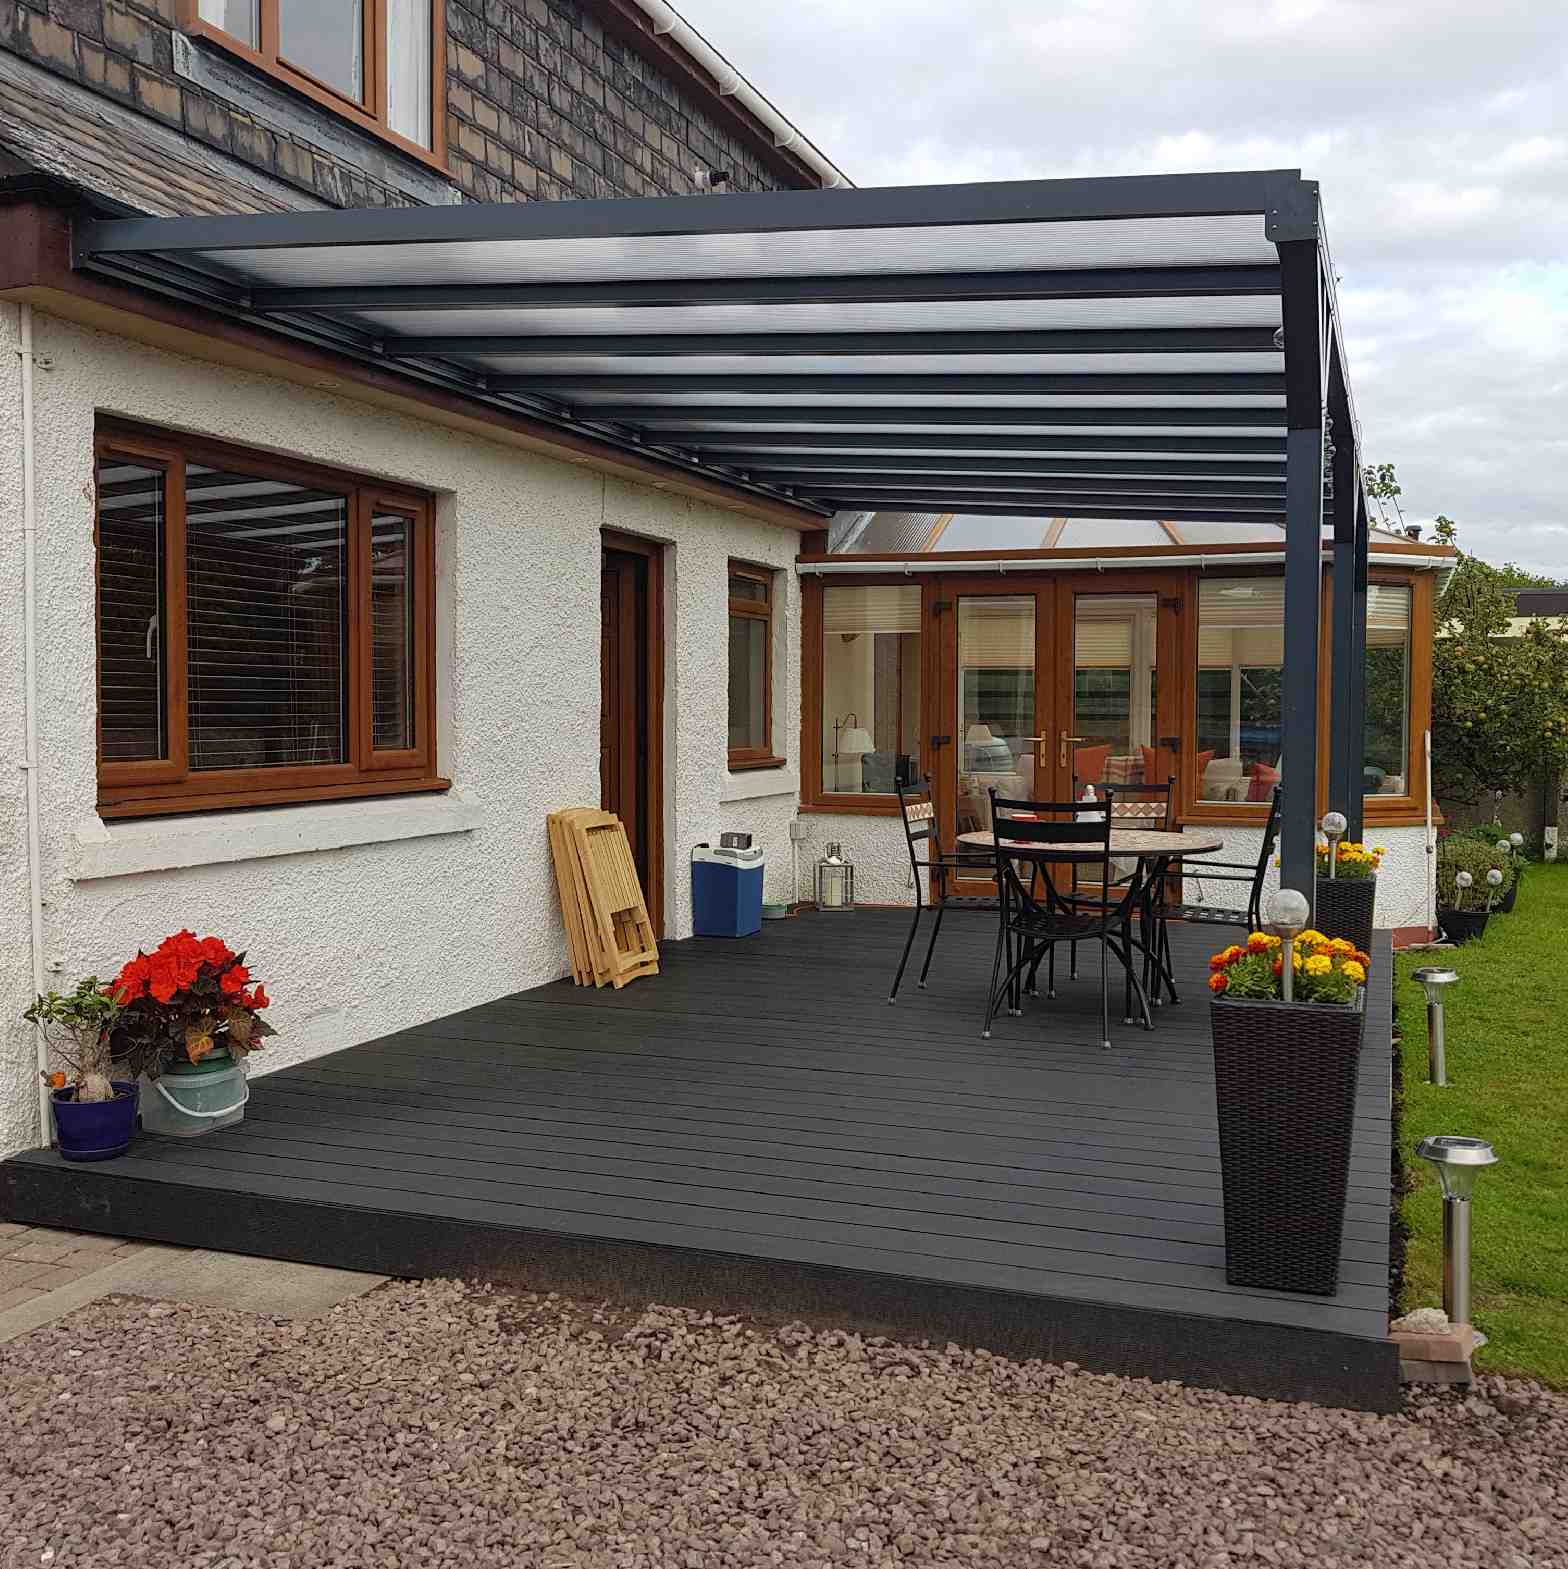 Buy Omega Verandah, Anthracite Grey, 16mm Polycarbonate Glazing - 4.2m (W) x 2.0m (P), (3) Supporting Posts online today